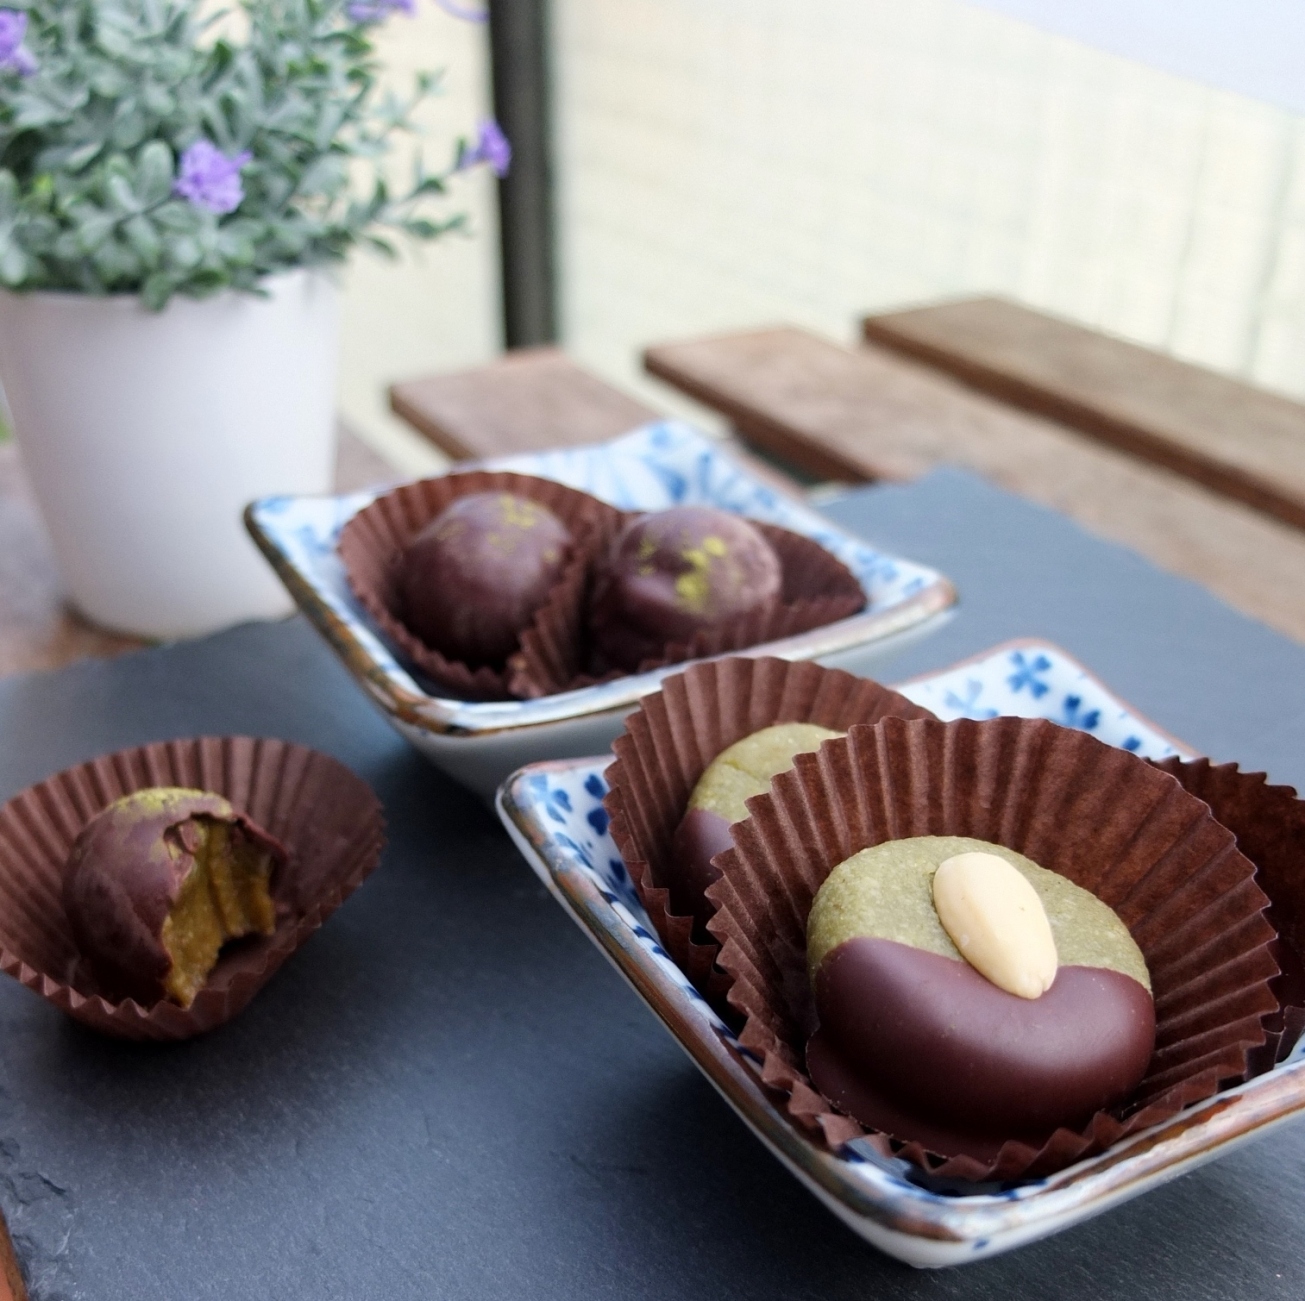 Healthier chocolate-covered matcha marzipans and date caramels